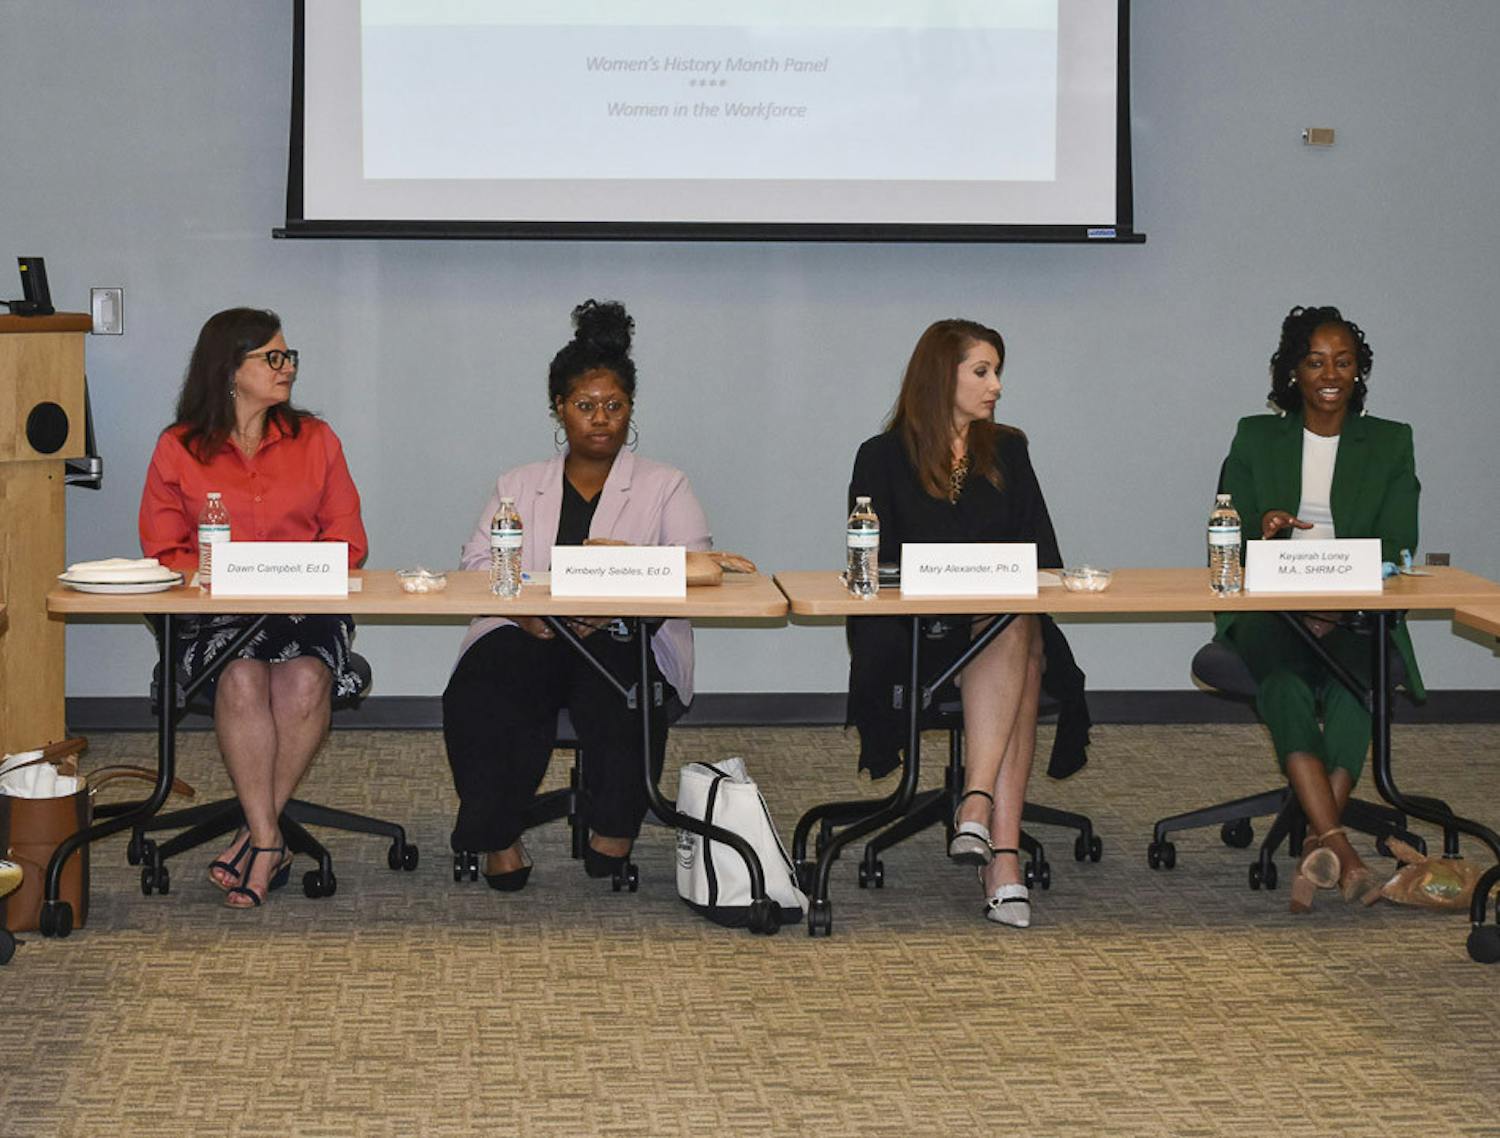 The speakers at the Women’s History Month panel discuss women's role in the workforce at the Career Center of Thomas Cooper Library on March 30, 2023. The panel touched on a range of topics from the gender wage gap to having a work-life balance.